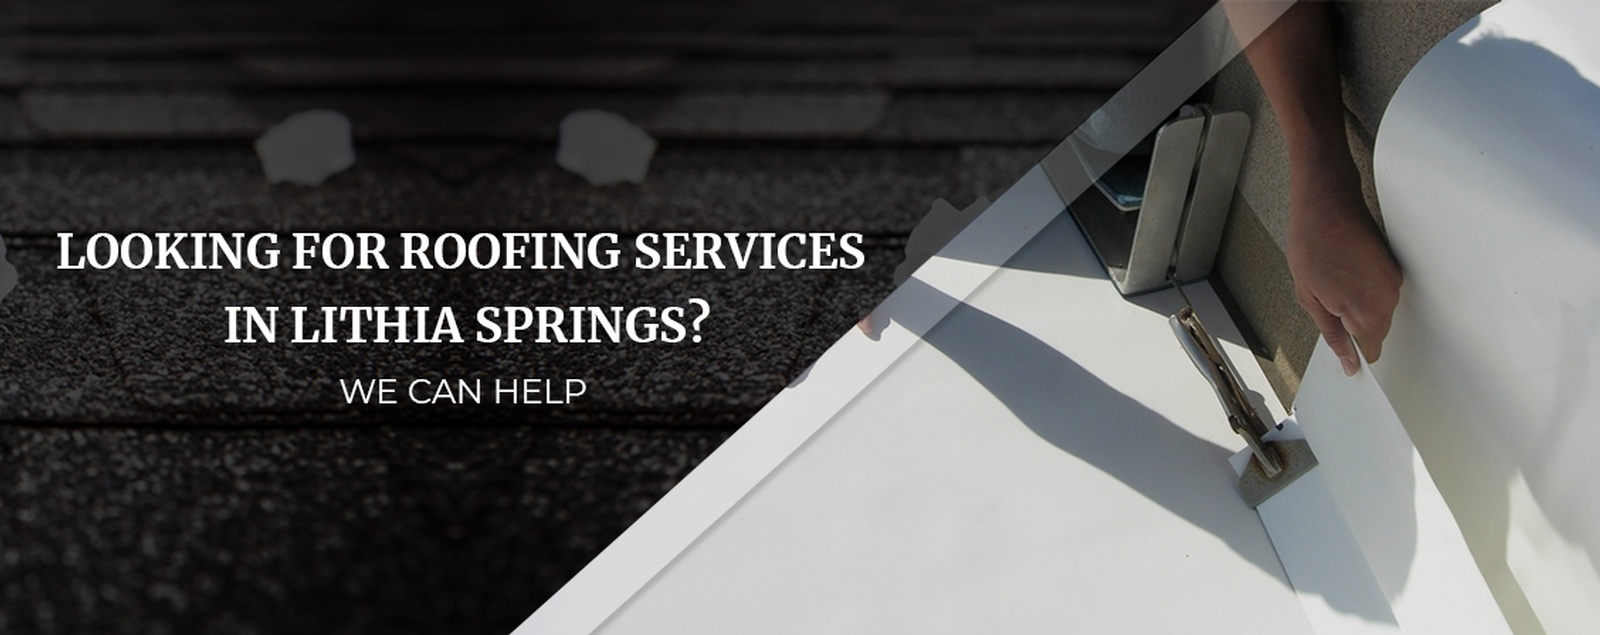 Looking For Roofing Services In Lithia Springs?We Can Help